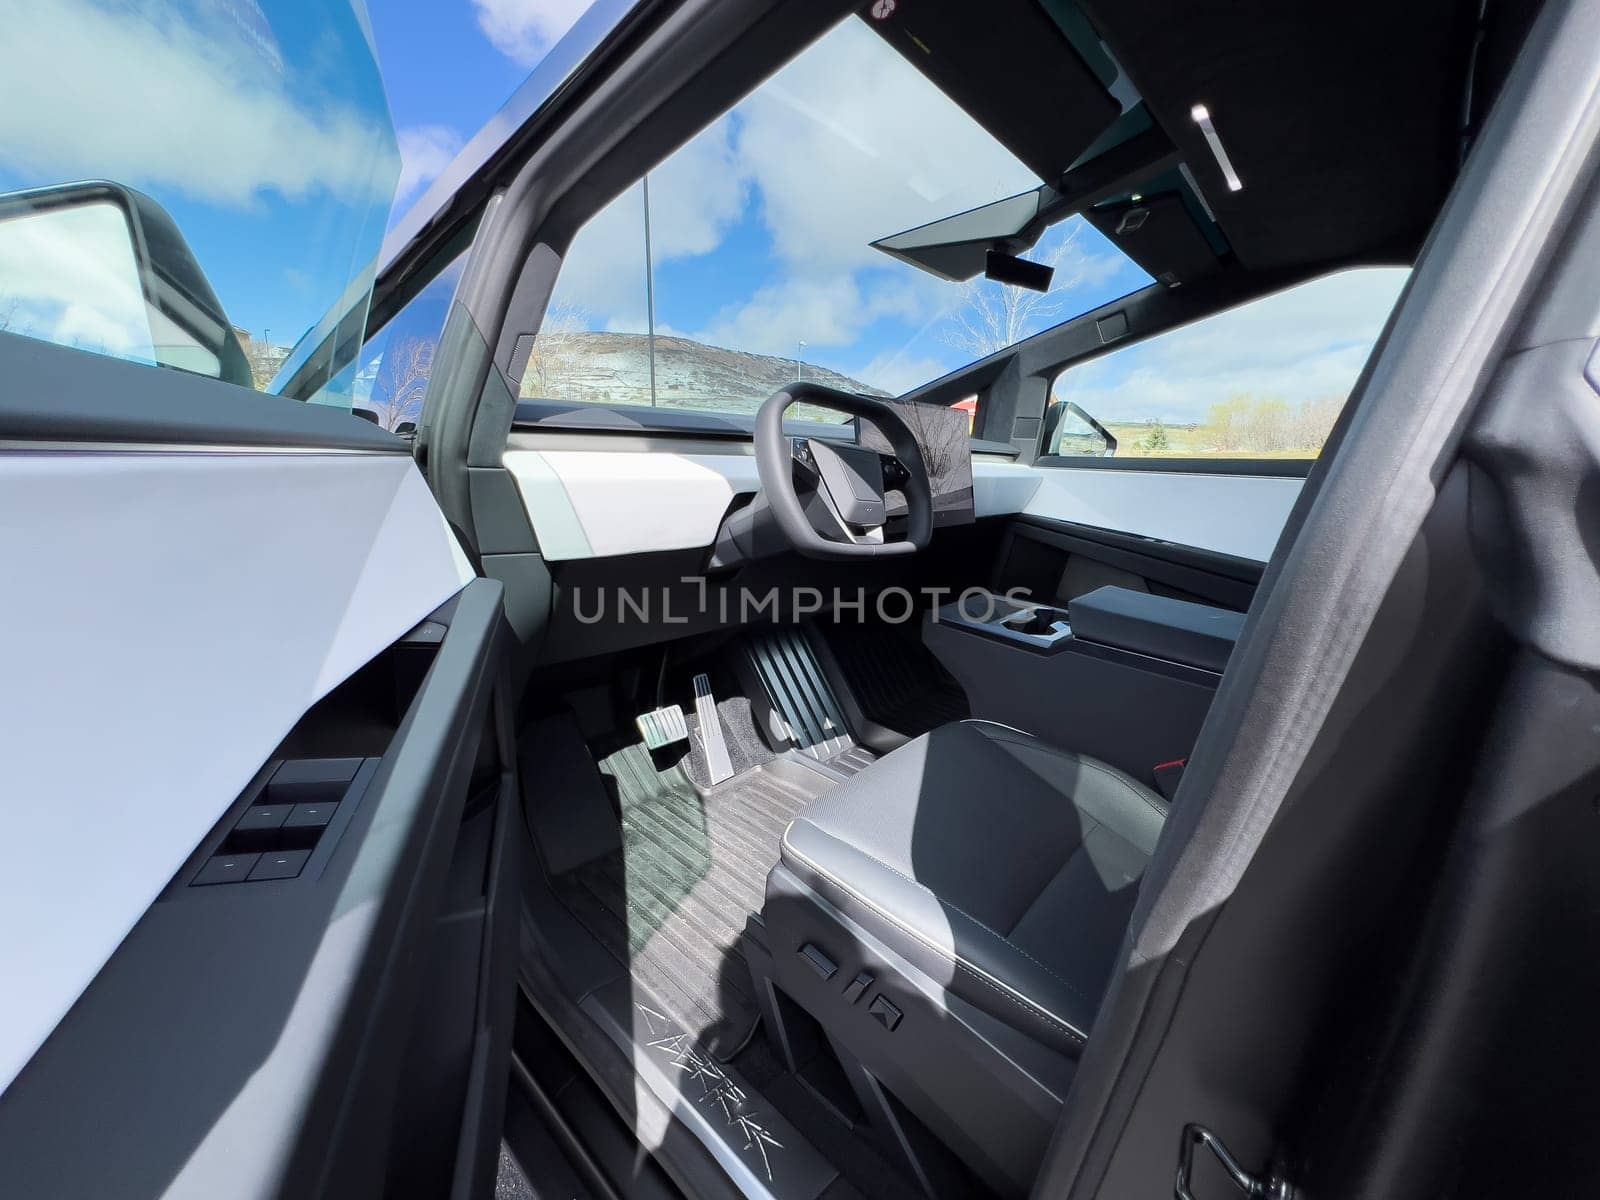 Minimalist Interior Design of the Tesla Cybertruck with Advanced Features by arinahabich